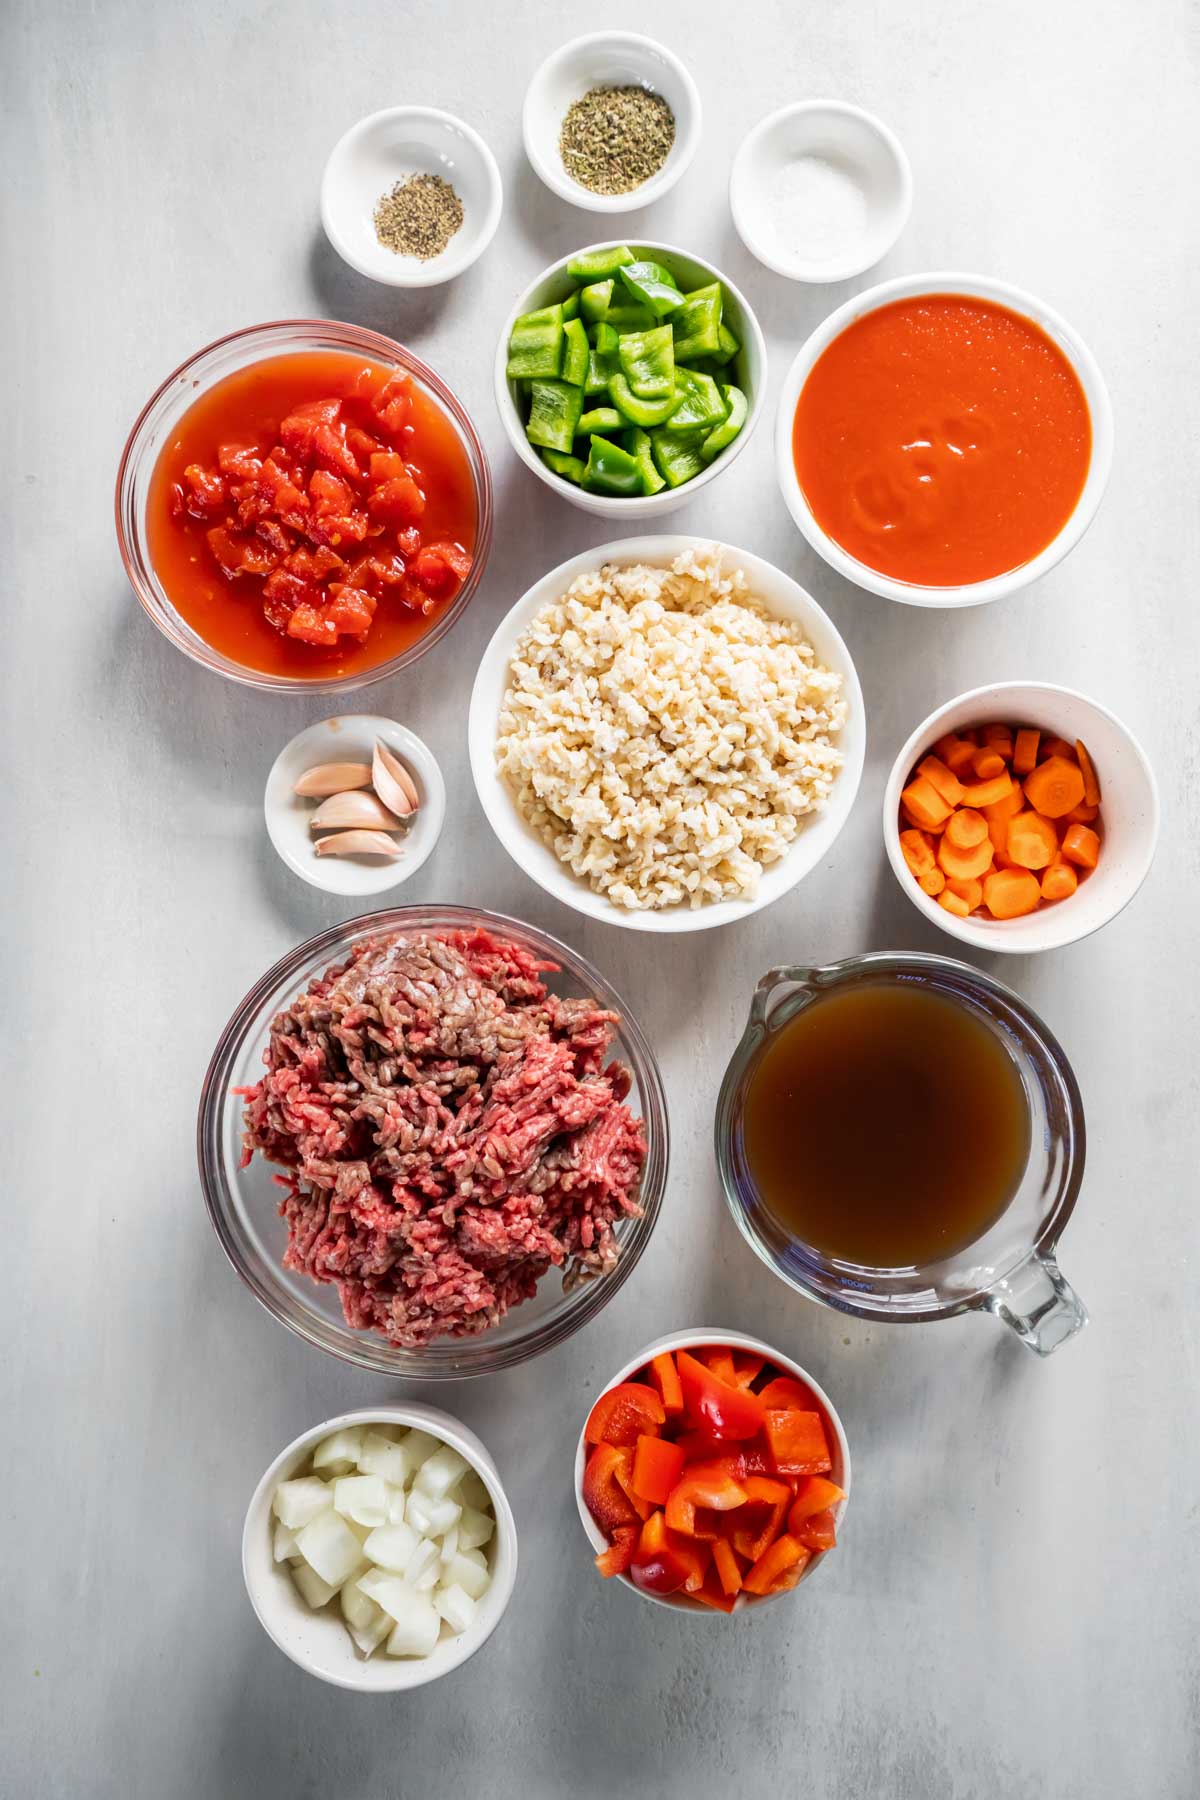 Ingredients for stuffed pepper soup recipe.